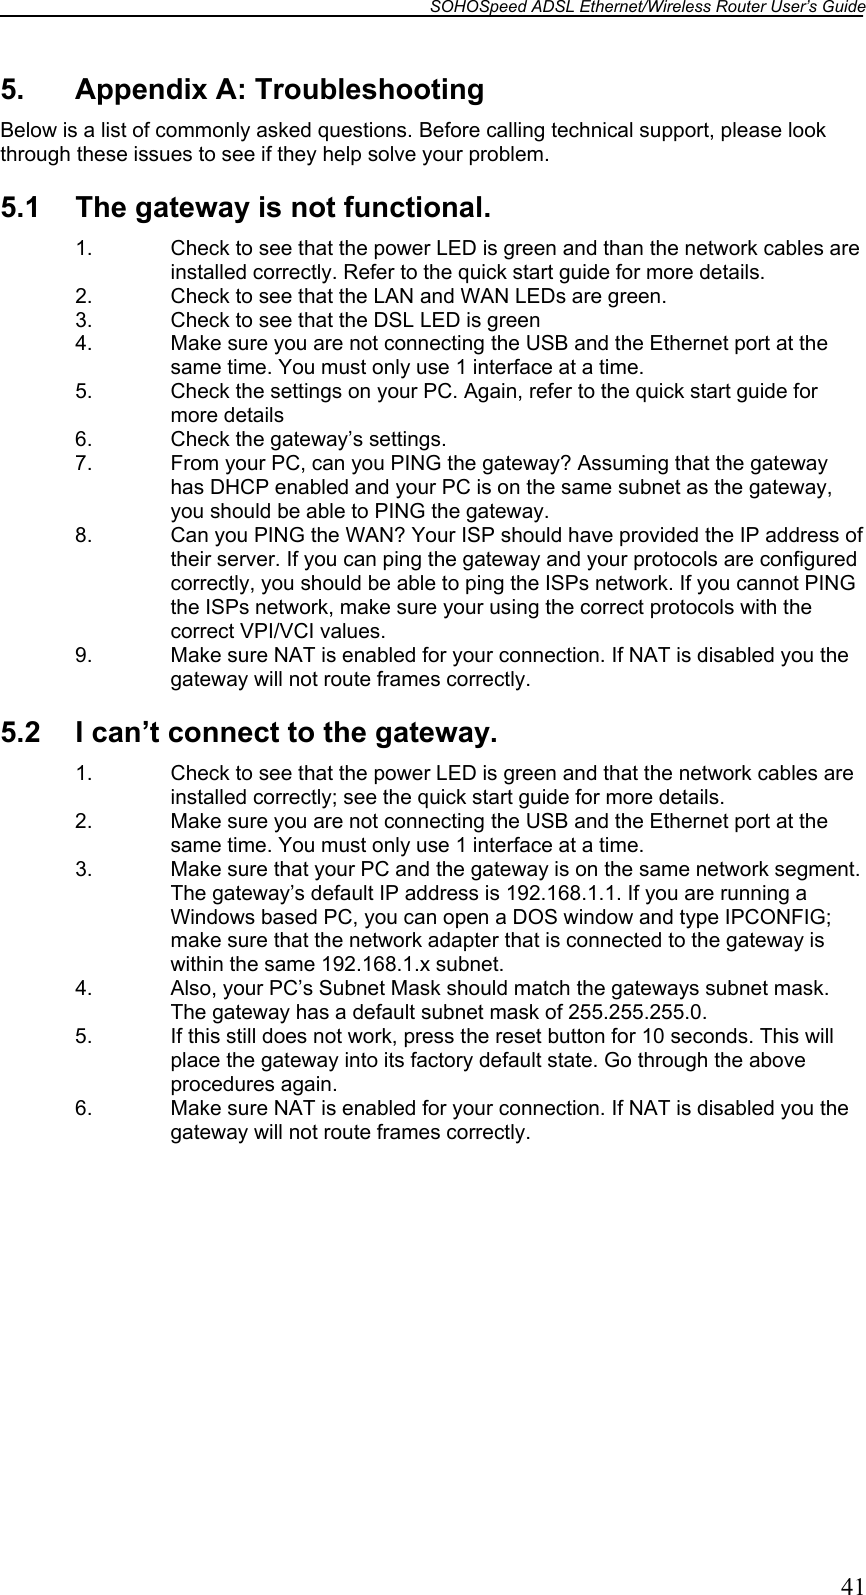 SOHOSpeed ADSL Ethernet/Wireless Router User’s Guide   41 5.  Appendix A: Troubleshooting Below is a list of commonly asked questions. Before calling technical support, please look through these issues to see if they help solve your problem.  5.1  The gateway is not functional. 1.  Check to see that the power LED is green and than the network cables are installed correctly. Refer to the quick start guide for more details. 2.  Check to see that the LAN and WAN LEDs are green.  3.  Check to see that the DSL LED is green 4.  Make sure you are not connecting the USB and the Ethernet port at the same time. You must only use 1 interface at a time. 5.  Check the settings on your PC. Again, refer to the quick start guide for more details 6.  Check the gateway’s settings. 7.  From your PC, can you PING the gateway? Assuming that the gateway has DHCP enabled and your PC is on the same subnet as the gateway, you should be able to PING the gateway.  8.  Can you PING the WAN? Your ISP should have provided the IP address of their server. If you can ping the gateway and your protocols are configured correctly, you should be able to ping the ISPs network. If you cannot PING the ISPs network, make sure your using the correct protocols with the correct VPI/VCI values. 9.  Make sure NAT is enabled for your connection. If NAT is disabled you the gateway will not route frames correctly.   5.2  I can’t connect to the gateway. 1.  Check to see that the power LED is green and that the network cables are installed correctly; see the quick start guide for more details. 2.  Make sure you are not connecting the USB and the Ethernet port at the same time. You must only use 1 interface at a time. 3.  Make sure that your PC and the gateway is on the same network segment. The gateway’s default IP address is 192.168.1.1. If you are running a Windows based PC, you can open a DOS window and type IPCONFIG; make sure that the network adapter that is connected to the gateway is within the same 192.168.1.x subnet. 4.  Also, your PC’s Subnet Mask should match the gateways subnet mask. The gateway has a default subnet mask of 255.255.255.0. 5.  If this still does not work, press the reset button for 10 seconds. This will place the gateway into its factory default state. Go through the above procedures again. 6.  Make sure NAT is enabled for your connection. If NAT is disabled you the gateway will not route frames correctly.  